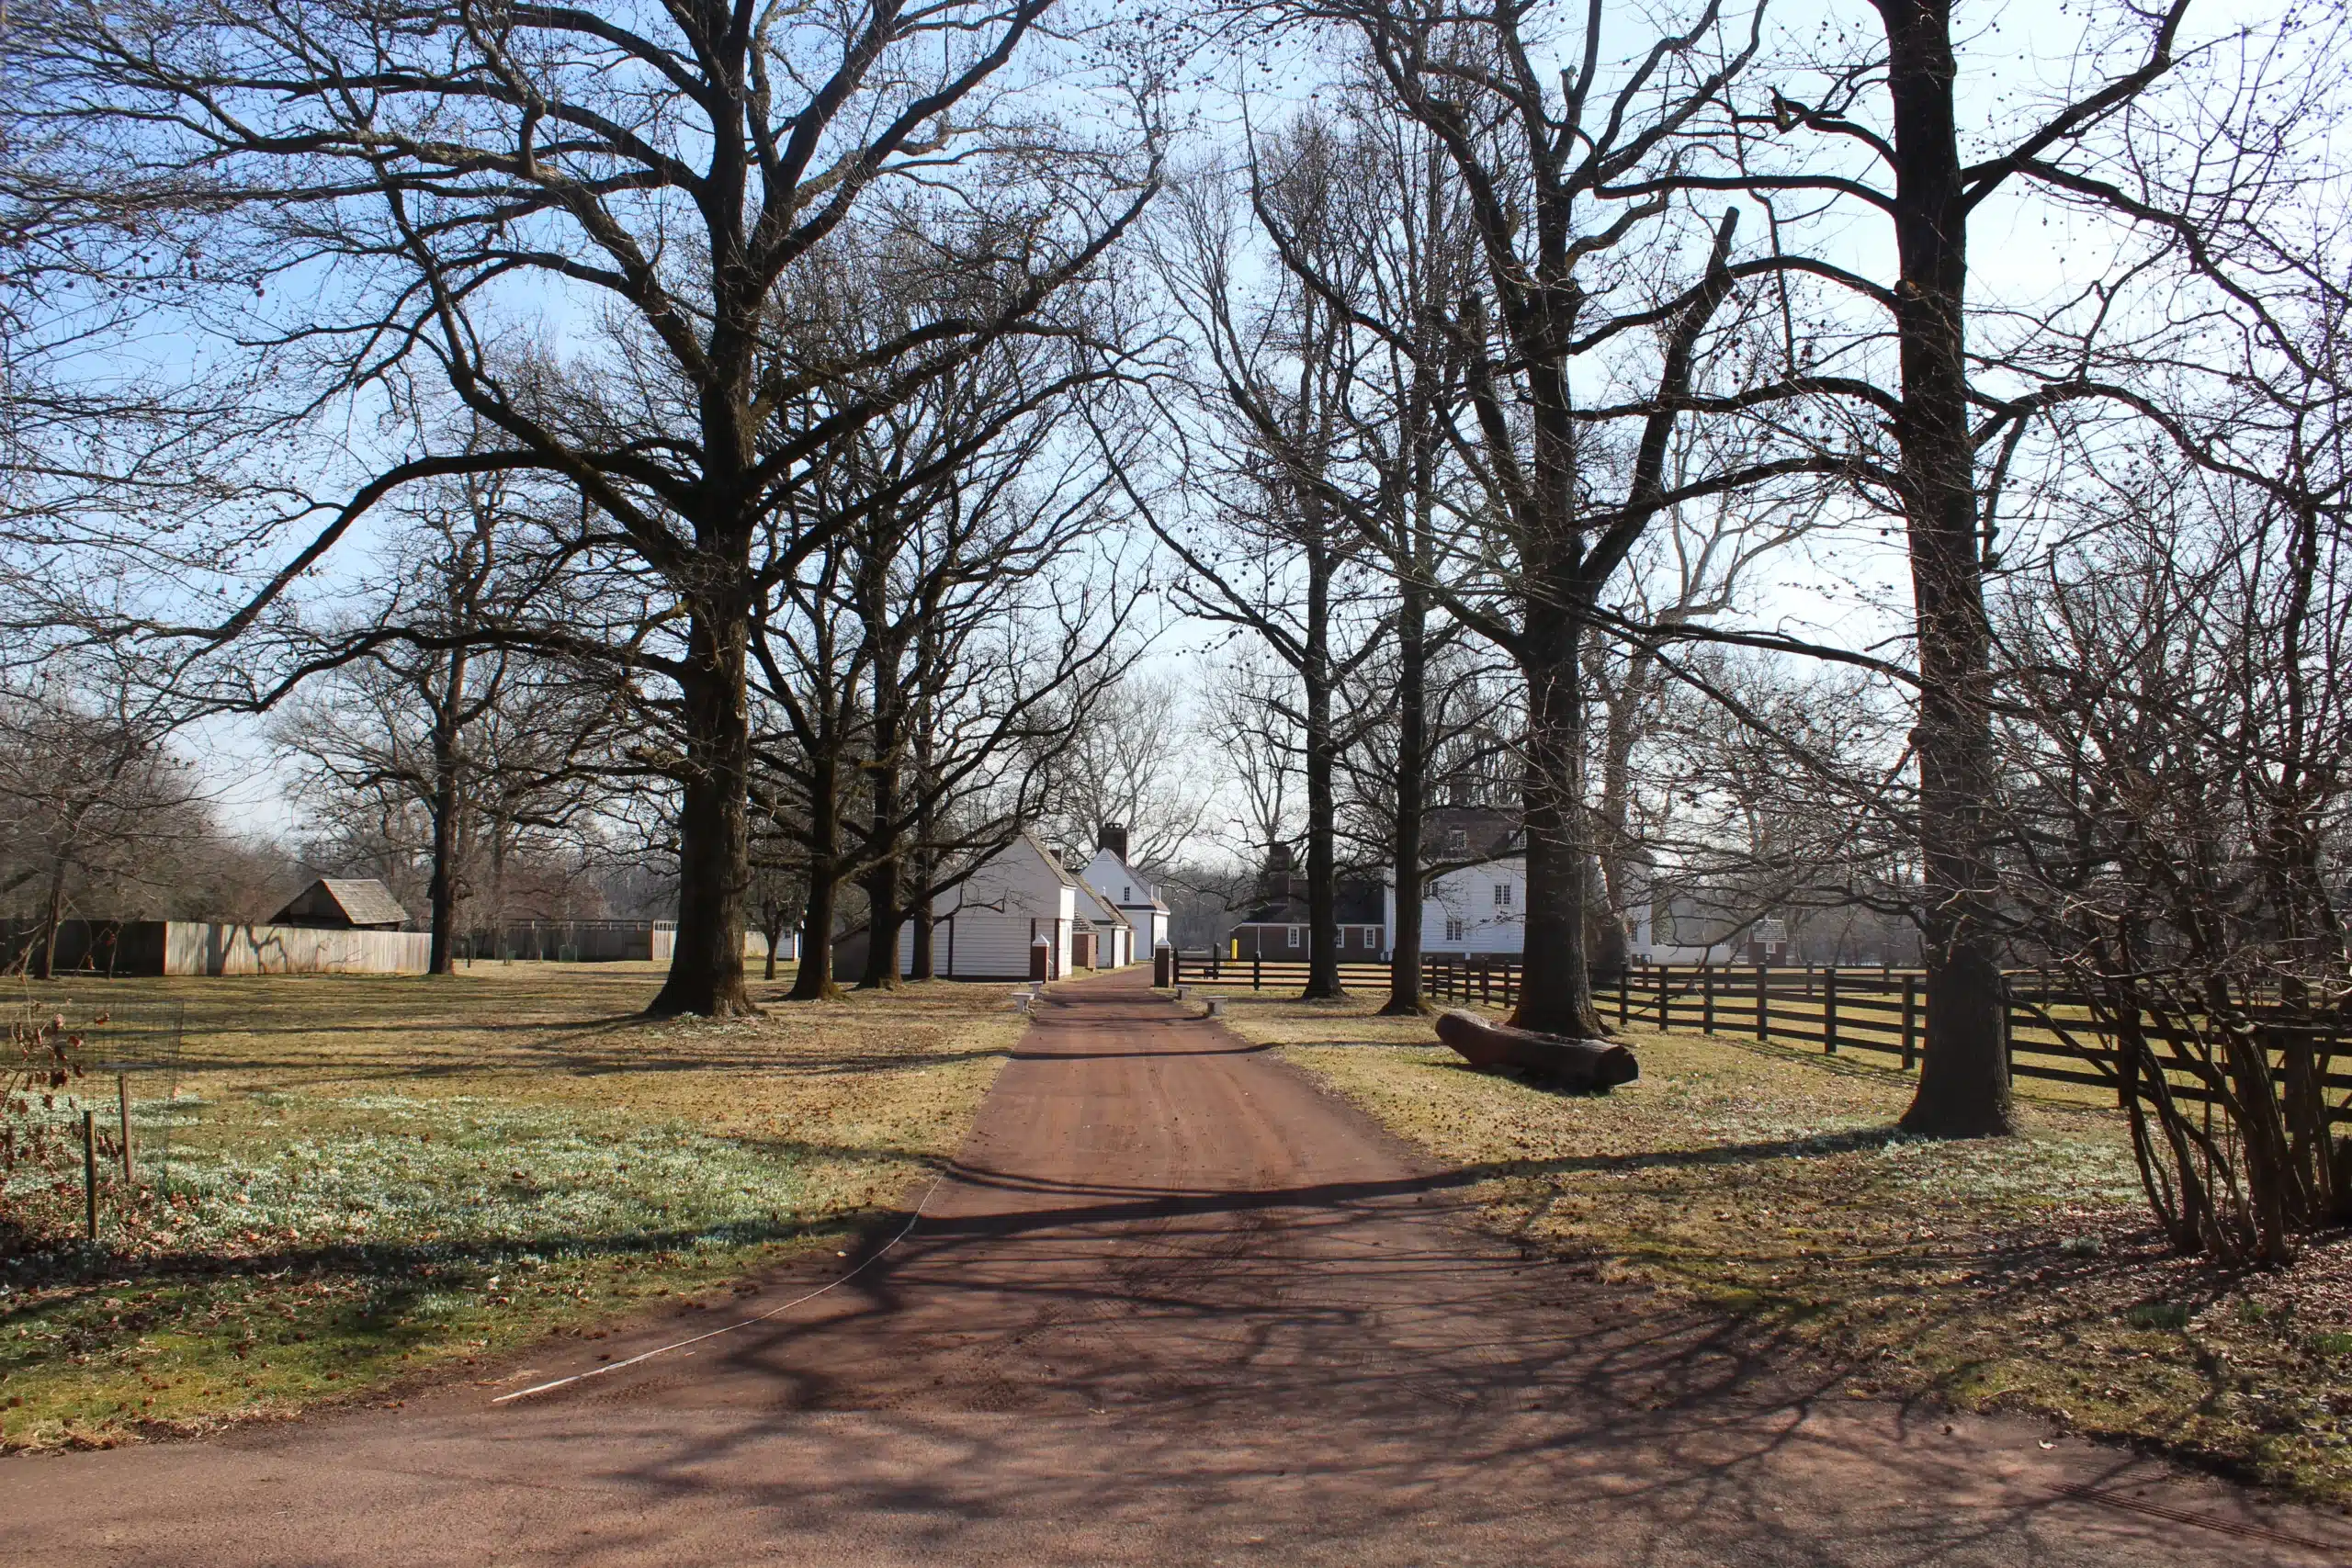 Red dirt path leading to the Manor house